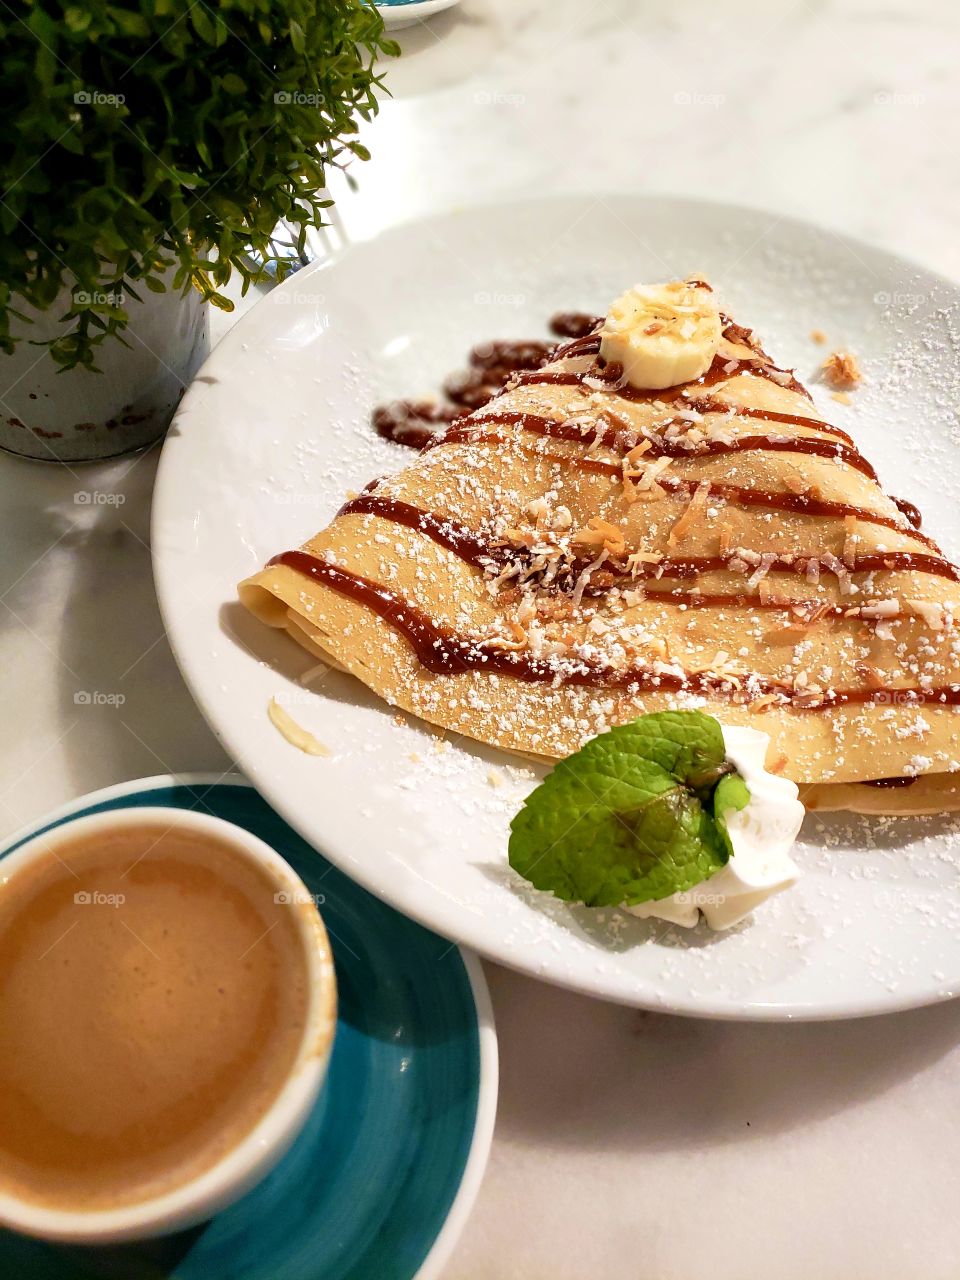 Crêpe with banana and drizzled caramel sauce next to a latte and potted herb plant.